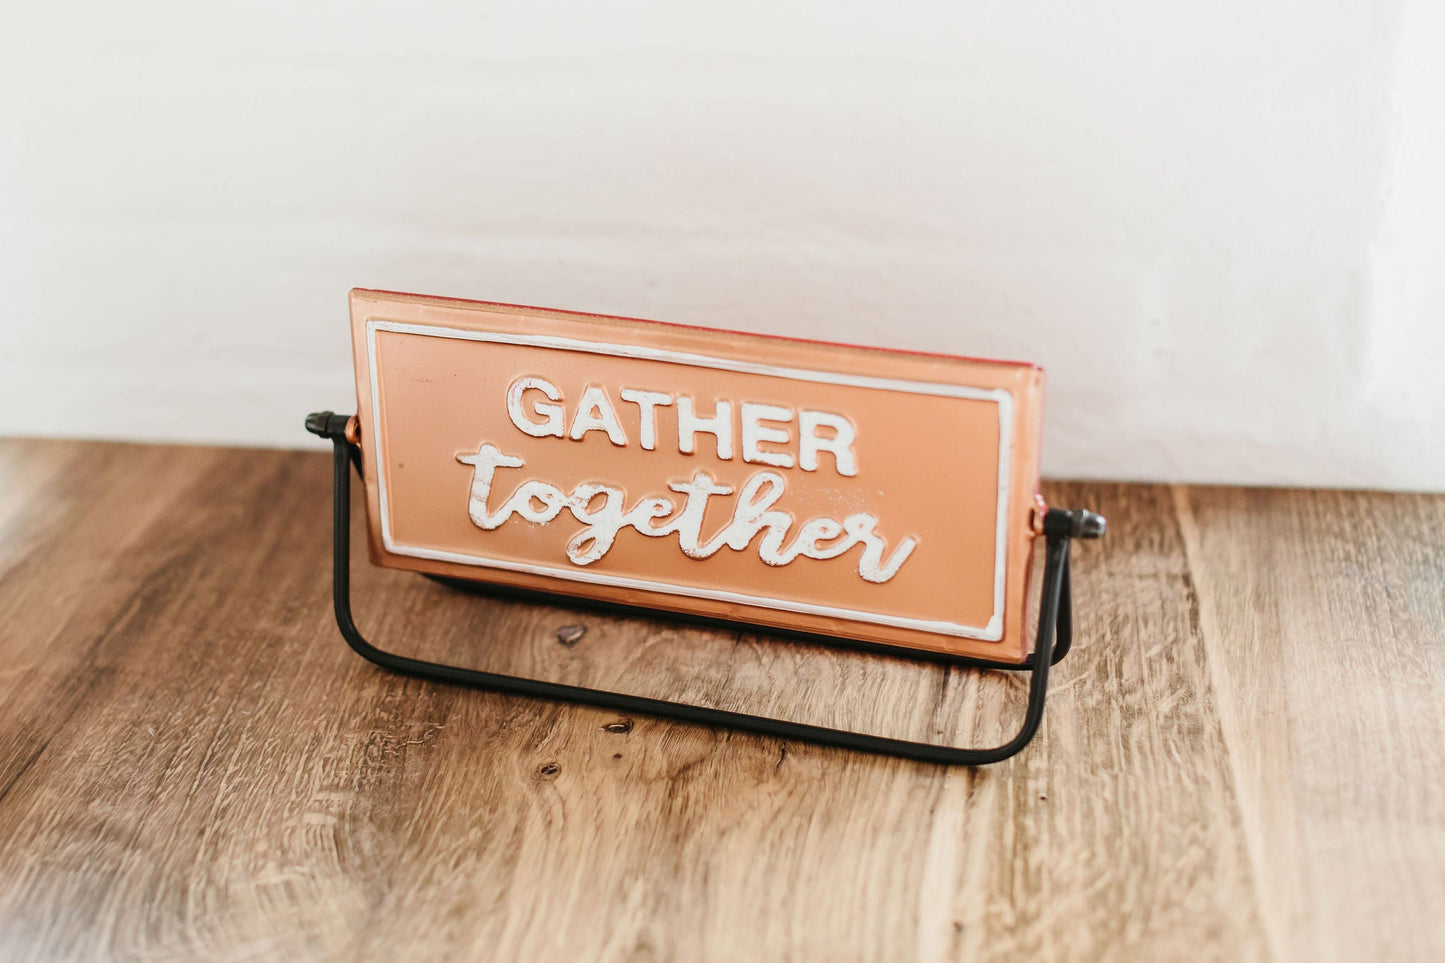 Two Sided Metal Sign - Gather, Merry Christmas